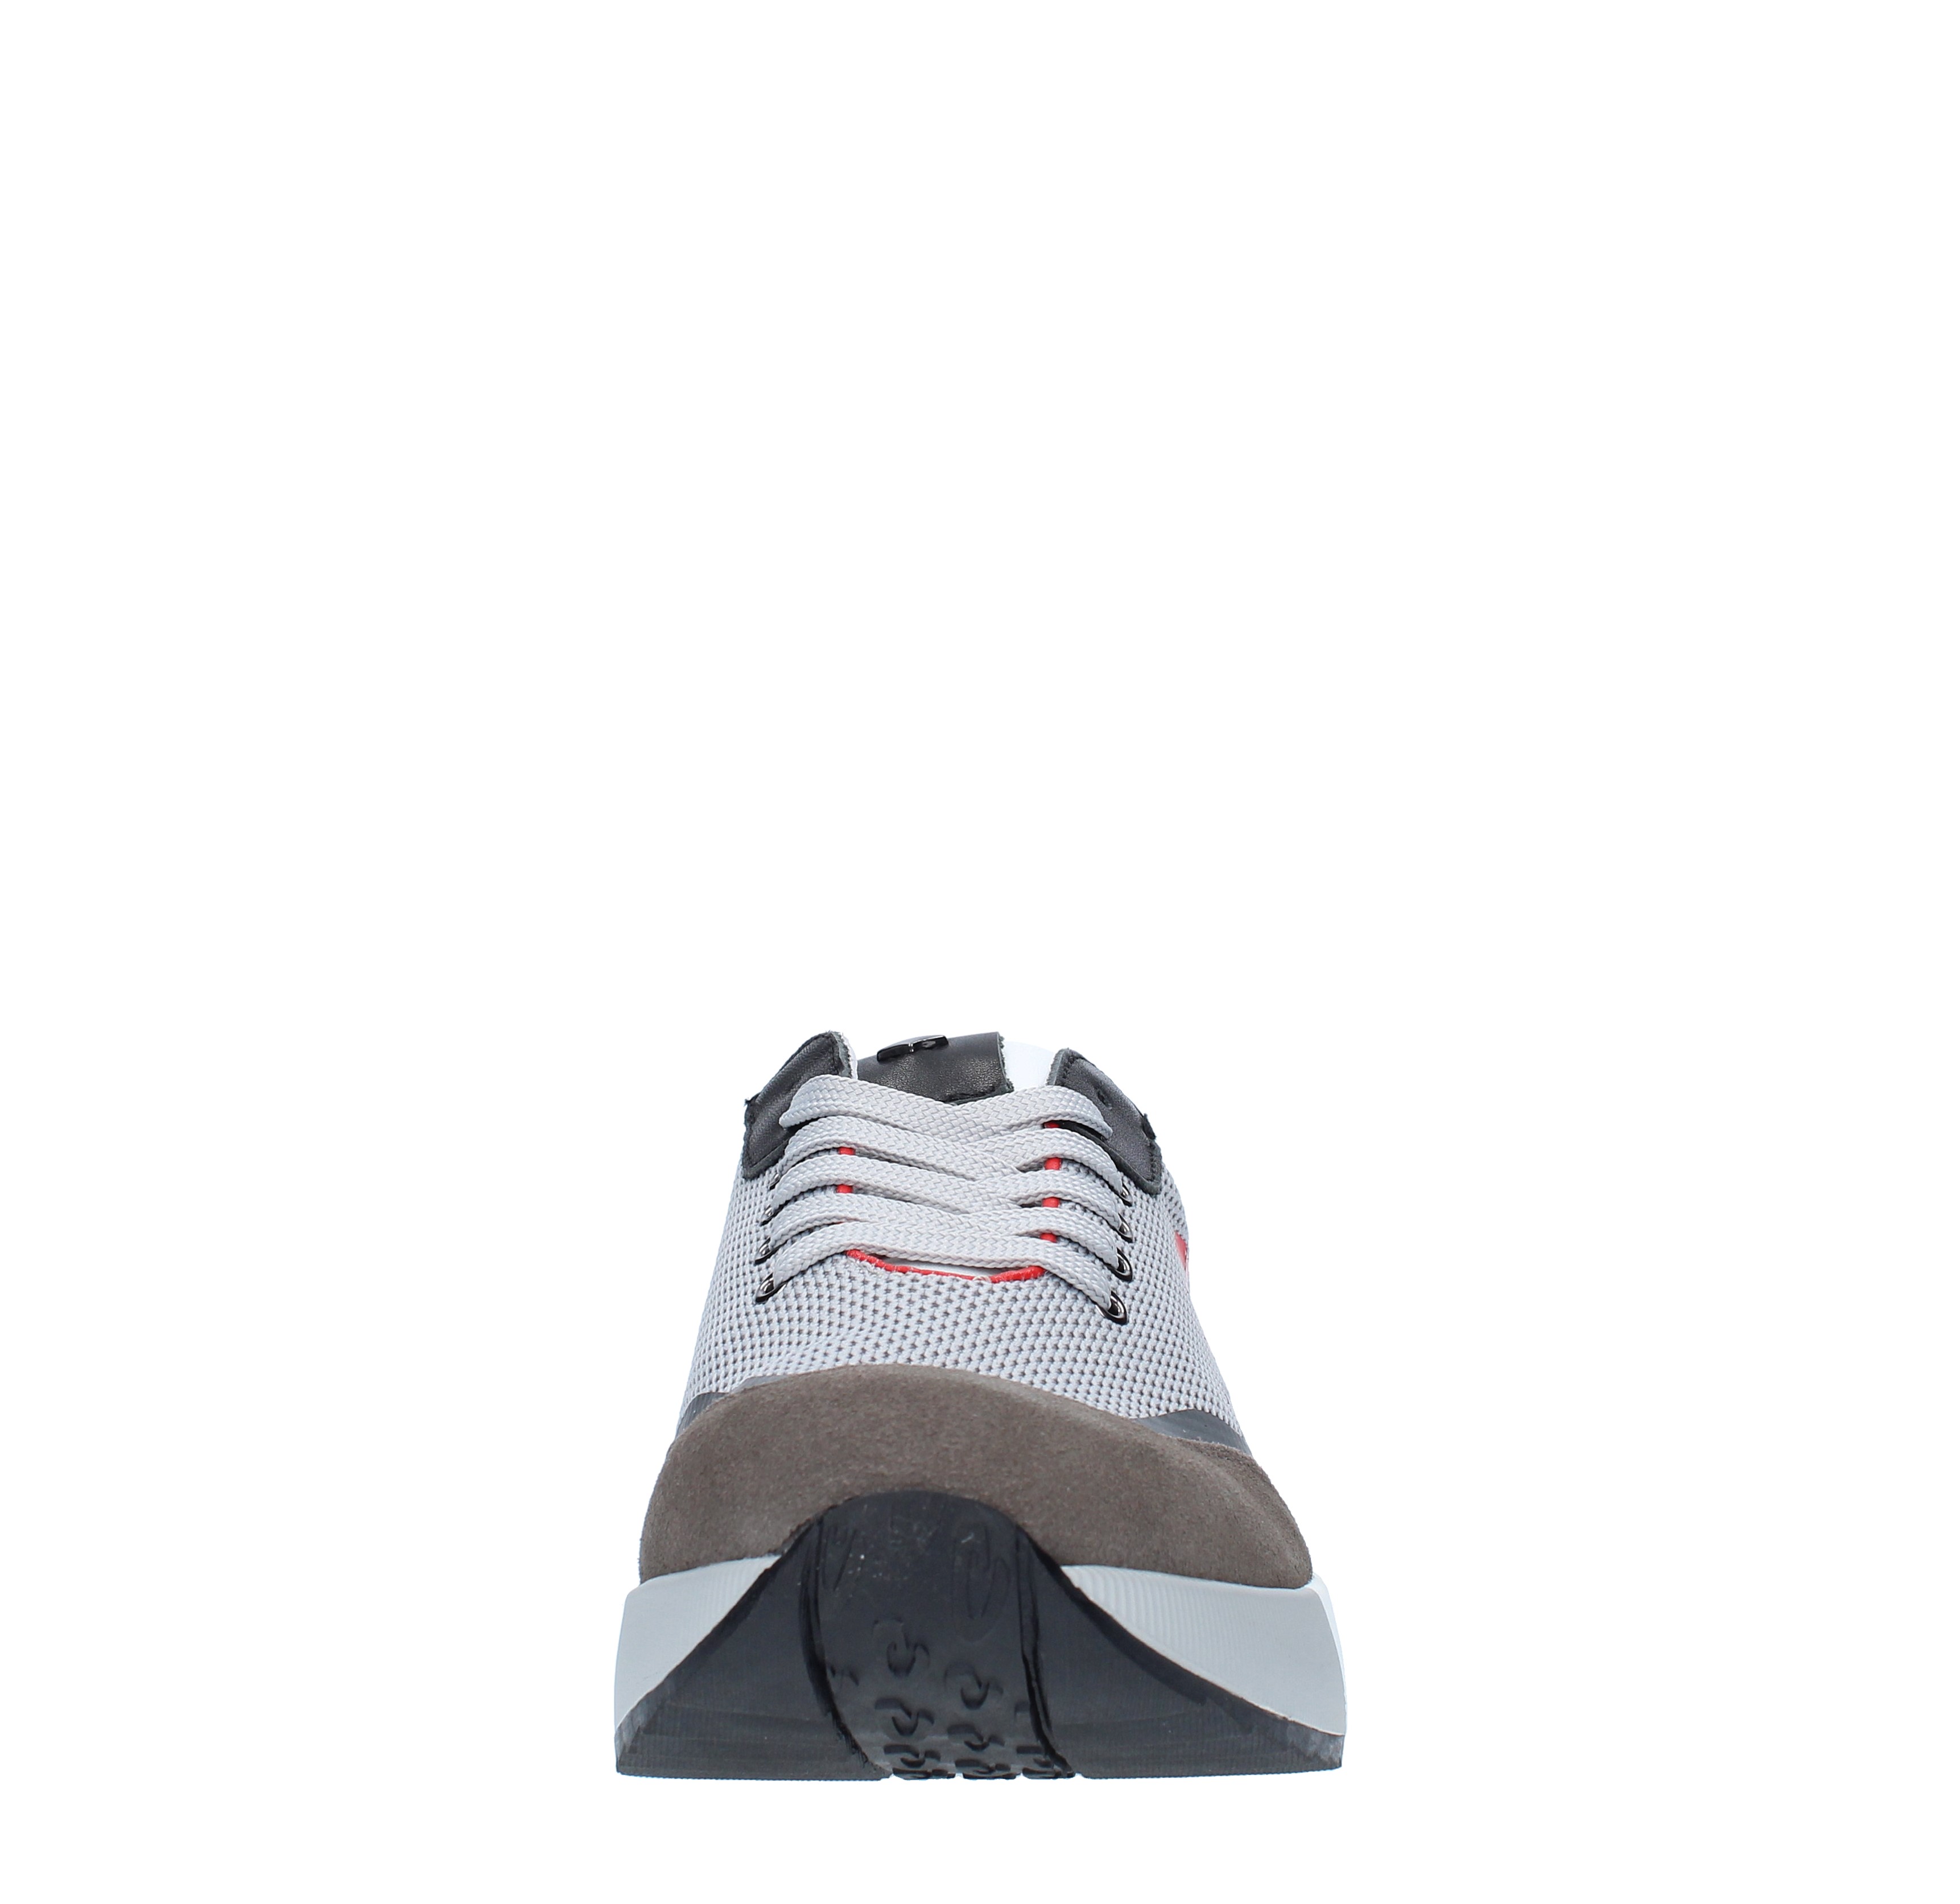 Woven leather and suede sneakers GUARDIANI | AGM009100GRIGIO TAUPE